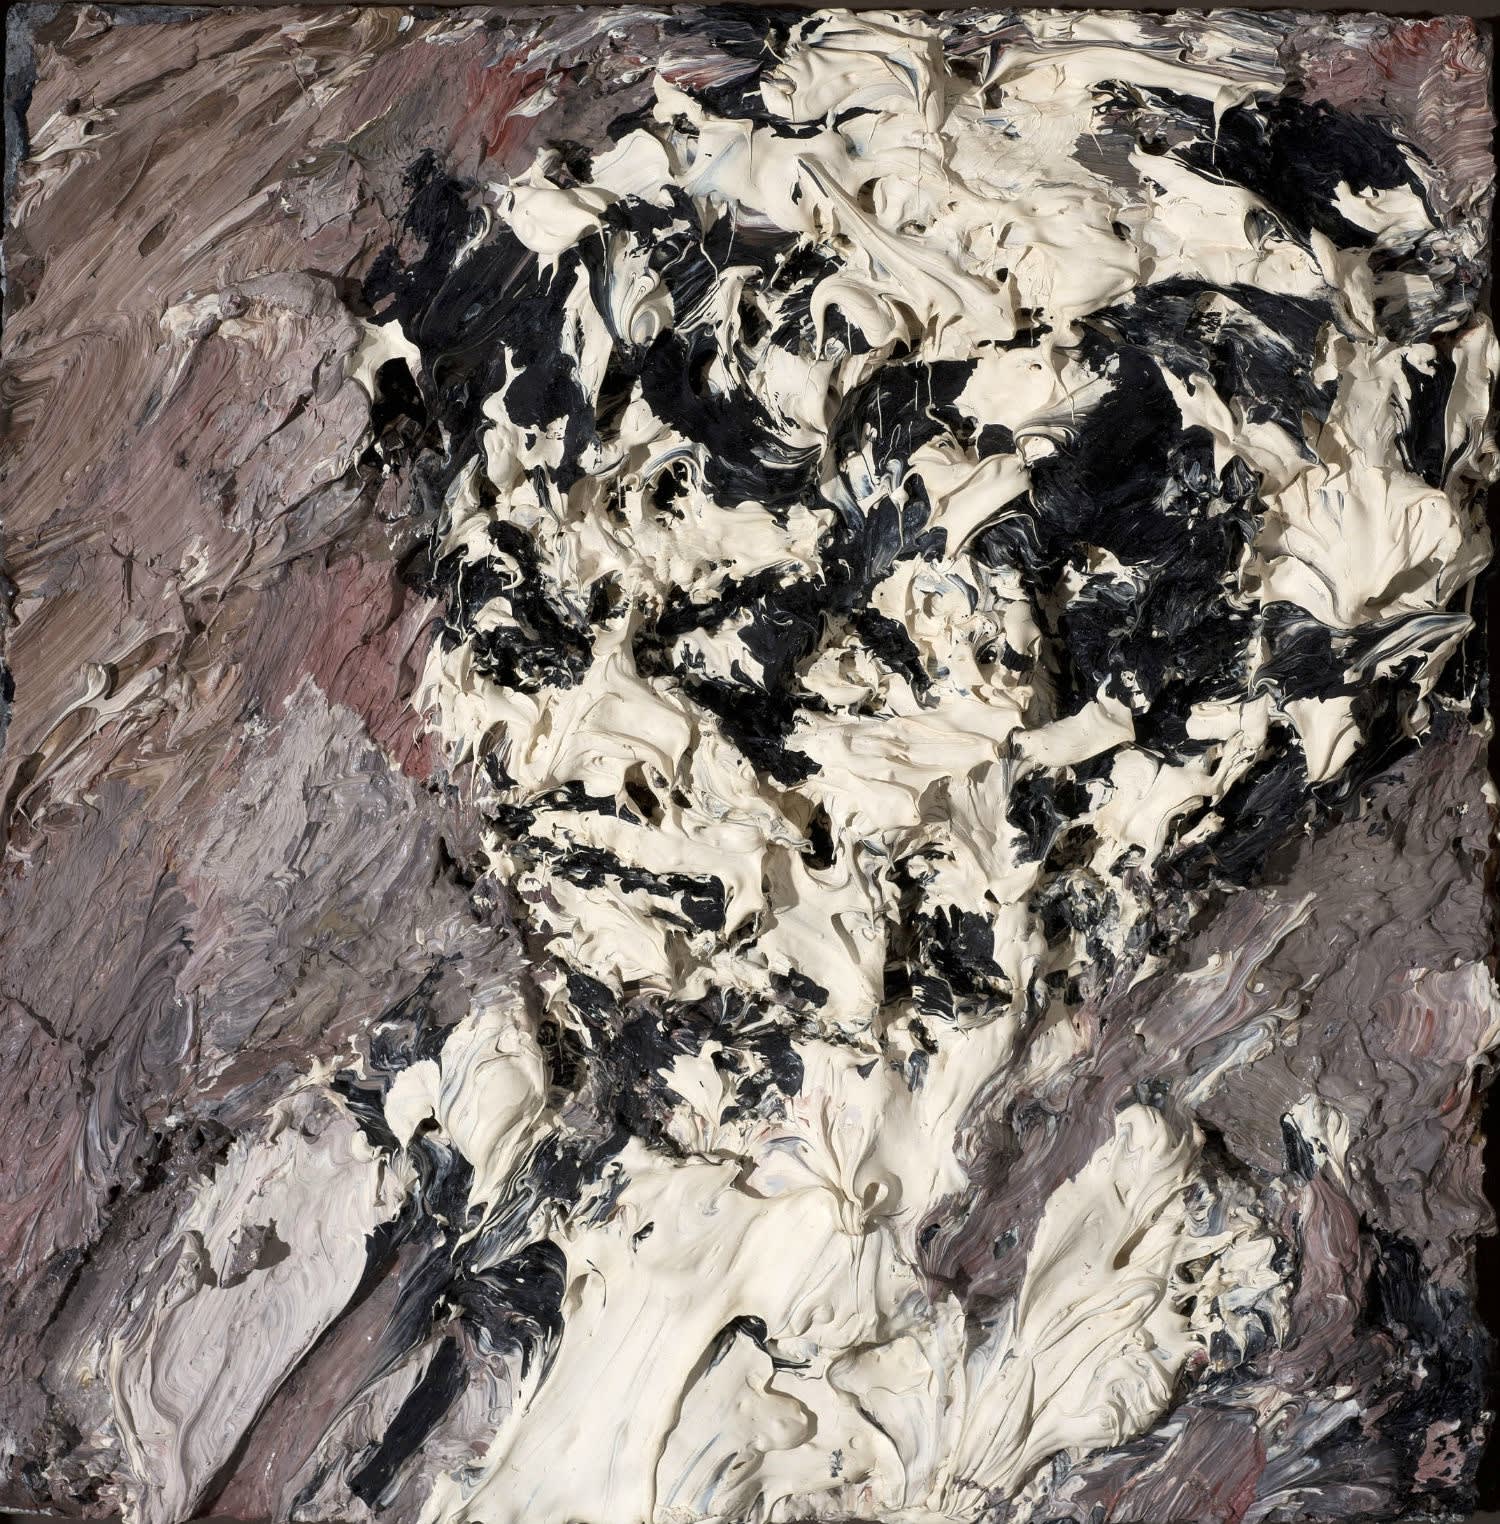 Frank Auerbach (1931-) Head of Helen Gillespie 1962-64 Oil painting on board 29.2 x 29.2 cm On loan to Ben Uri Collection © Frank Auerbach, courtesy of Marlborough Fine Art To see and discover more about this artist click here